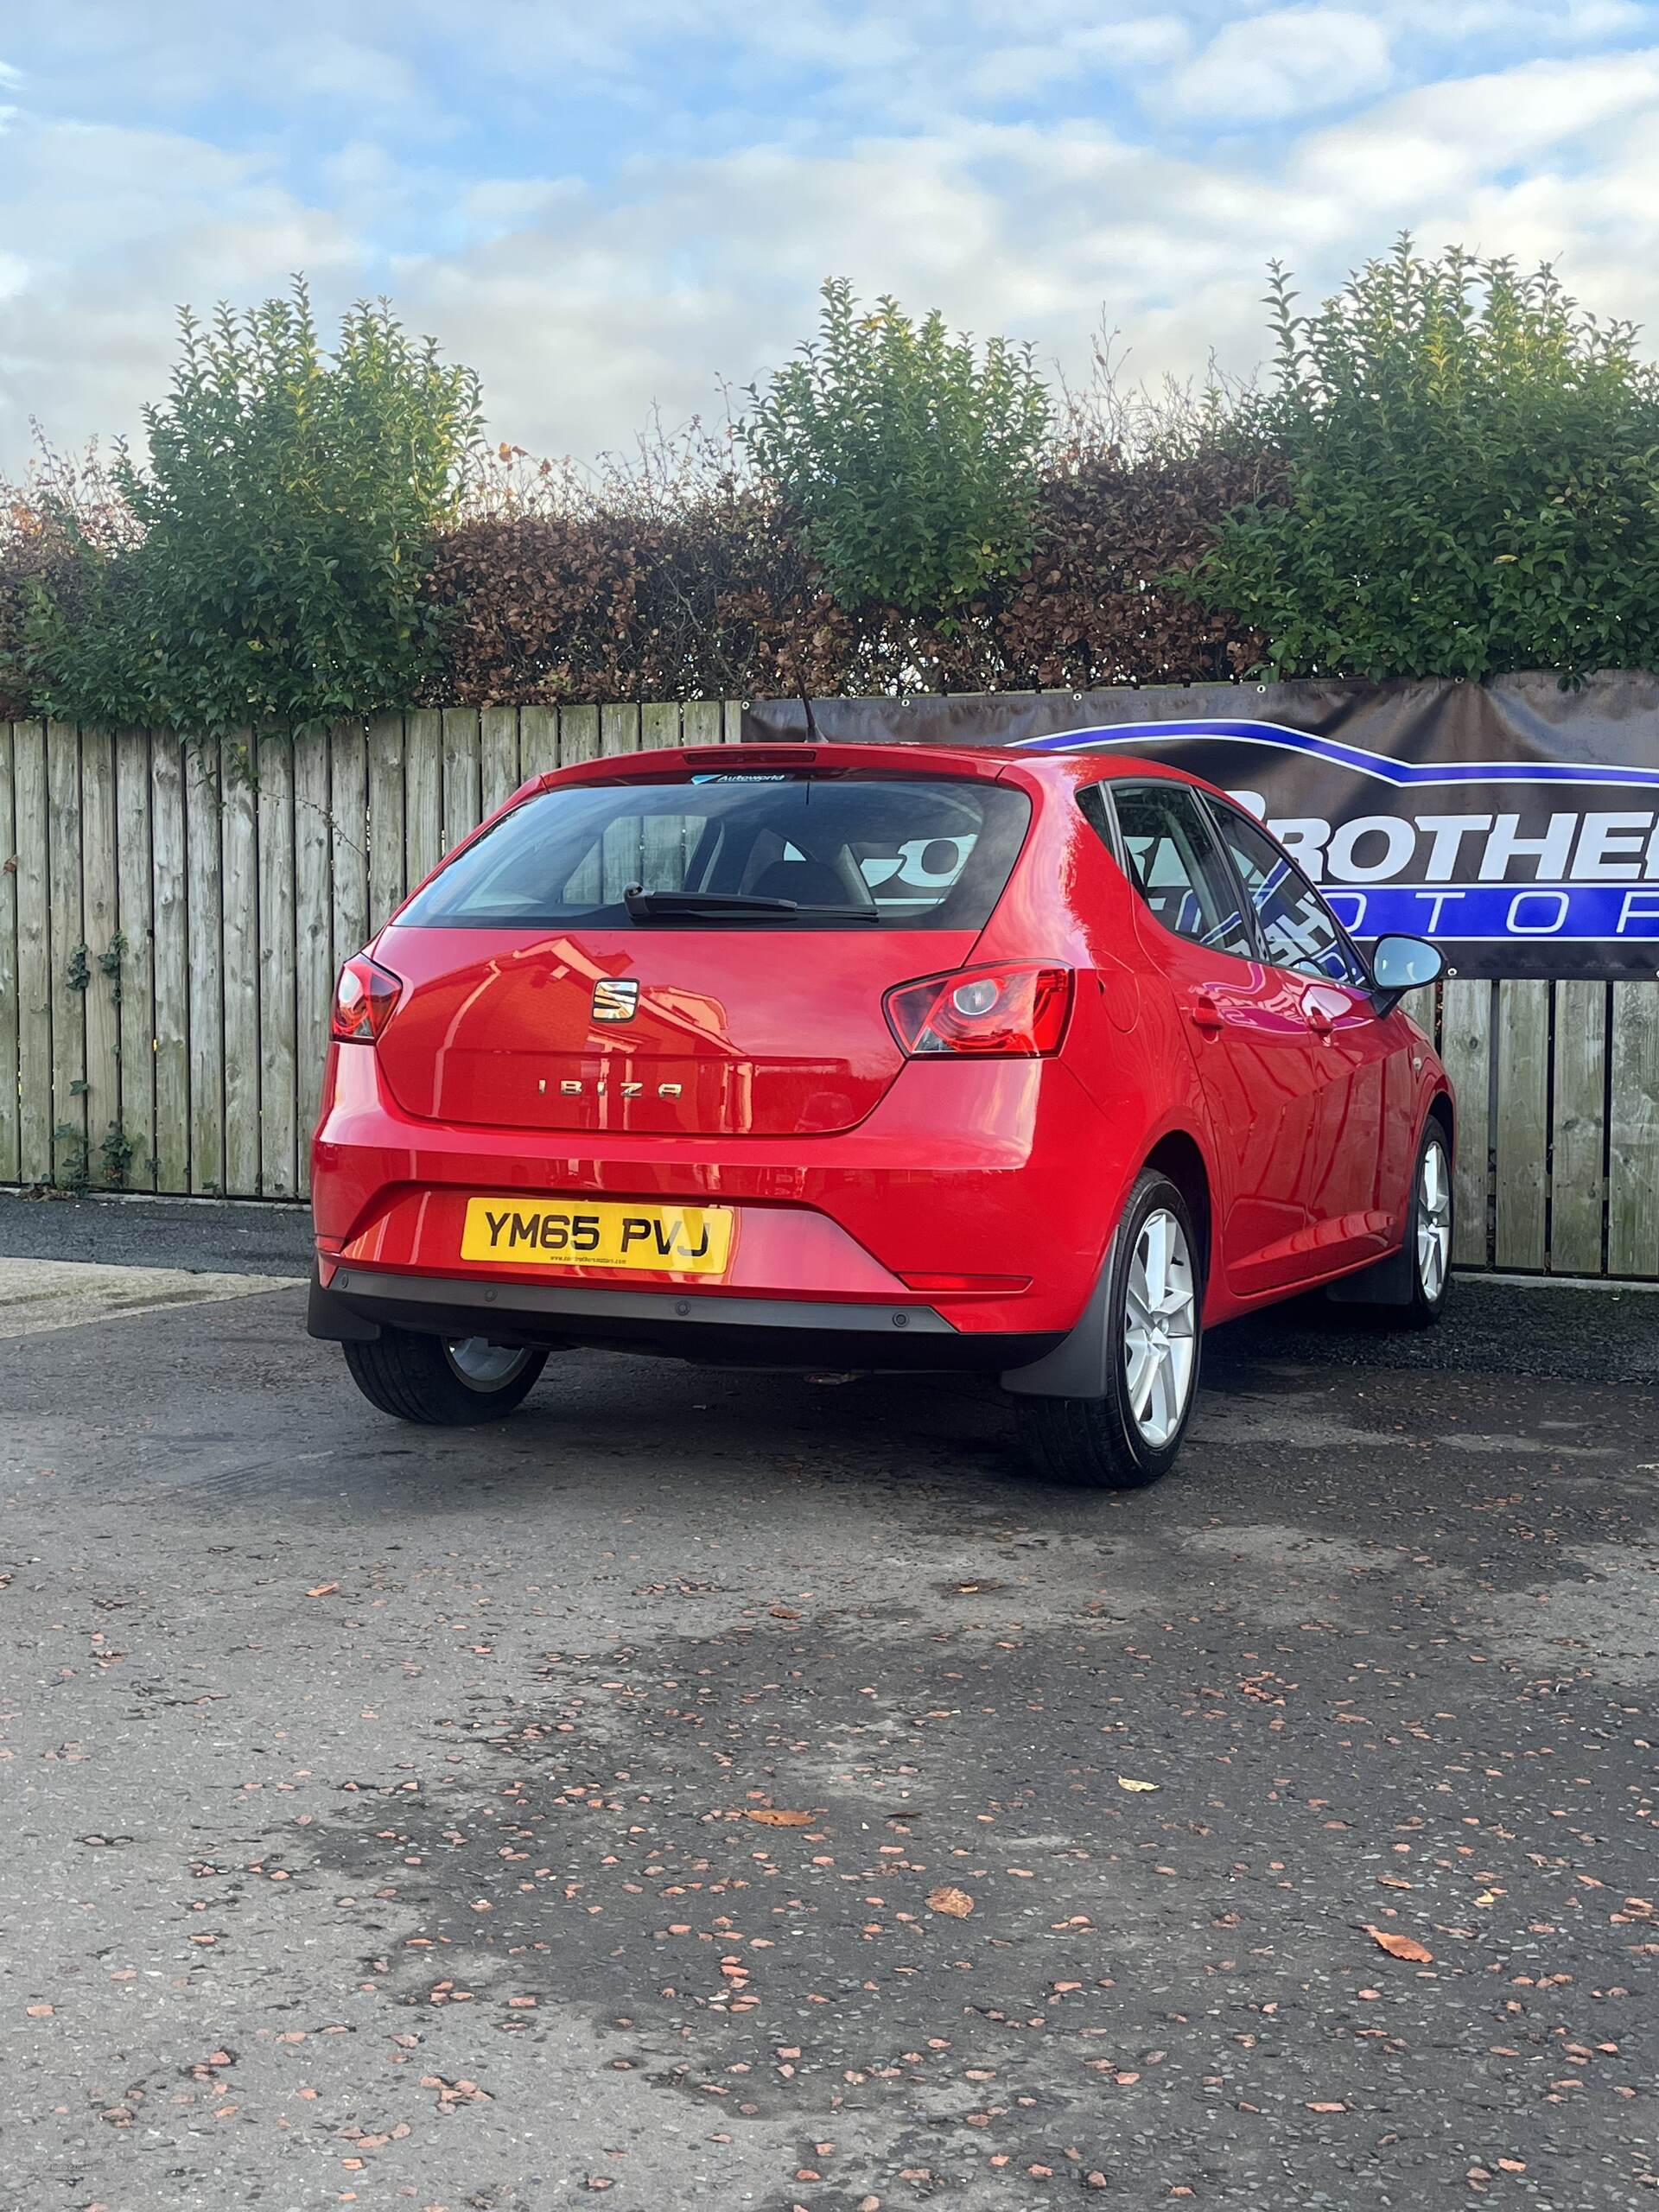 Seat Ibiza HATCHBACK SPECIAL EDITION in Tyrone